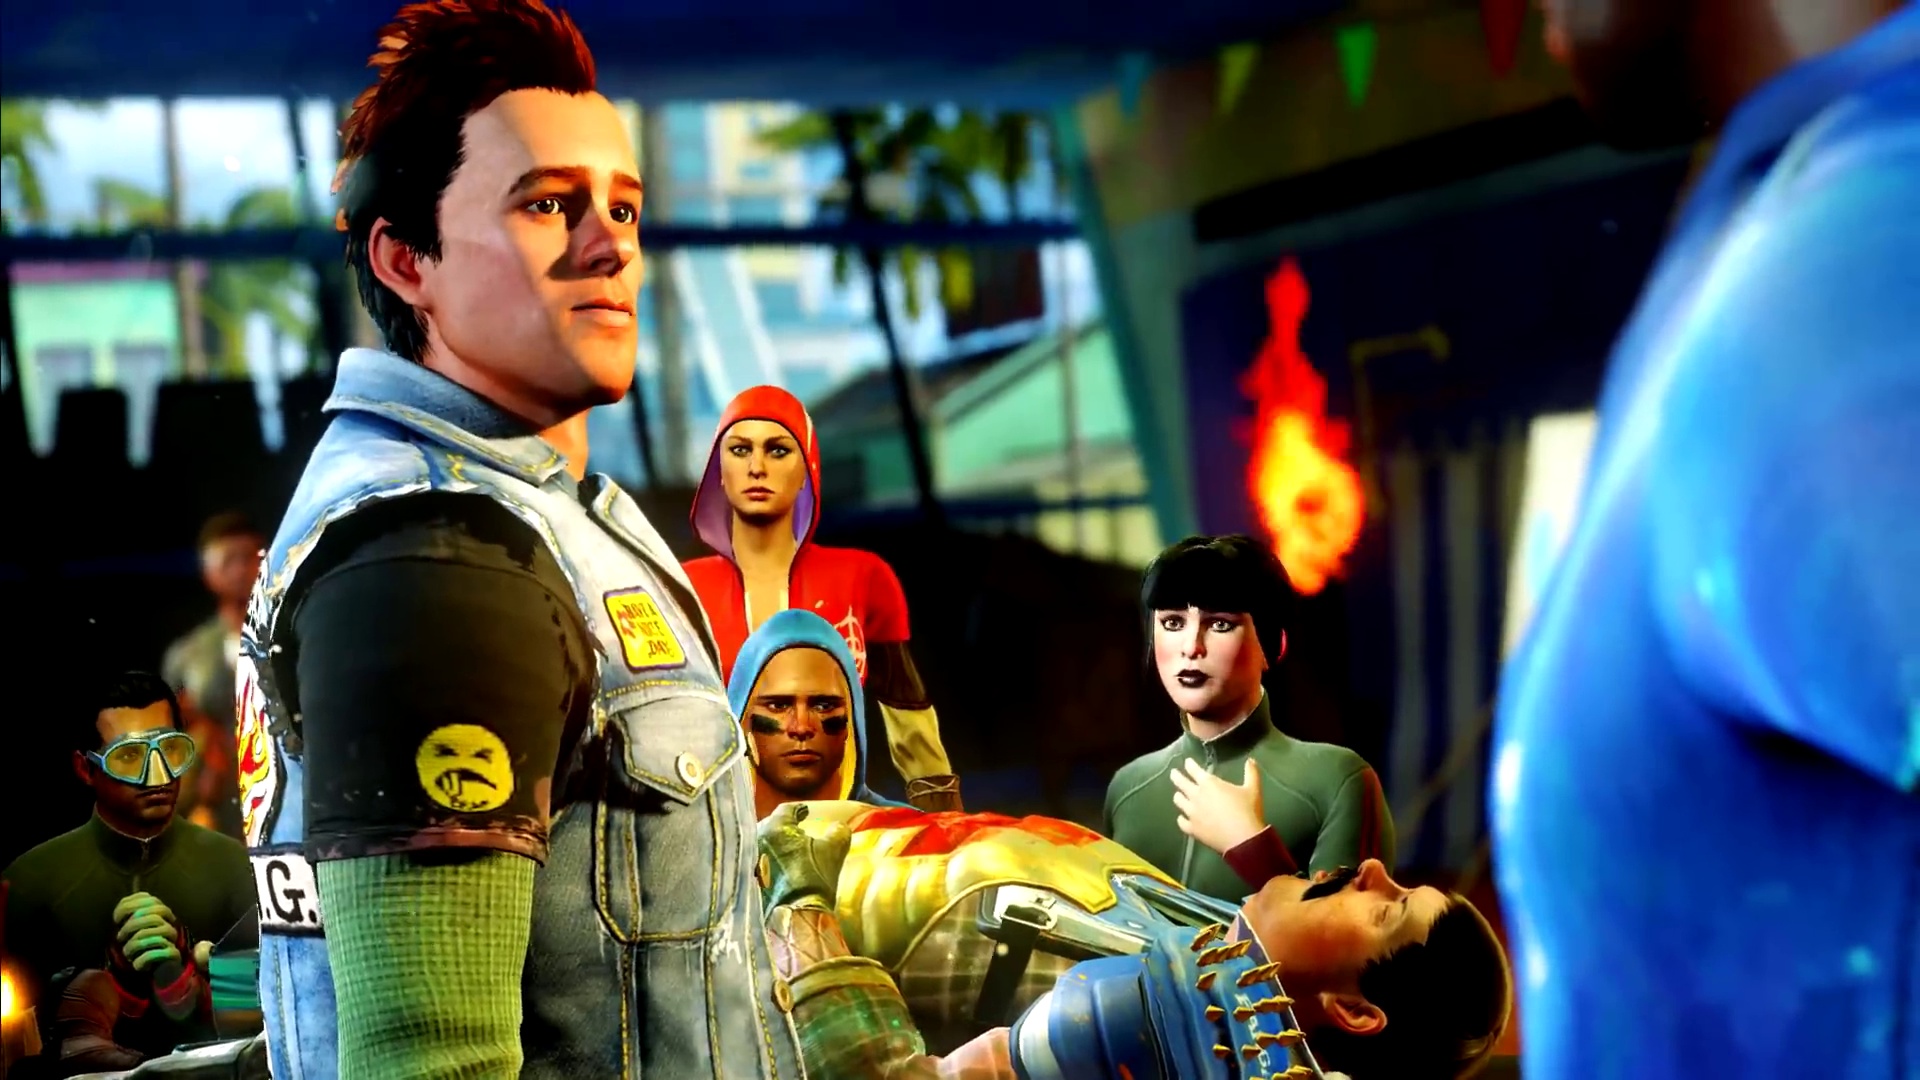 Sunset Overdrive Xbox One - Gameplay 4 - Vidéo Dailymotion